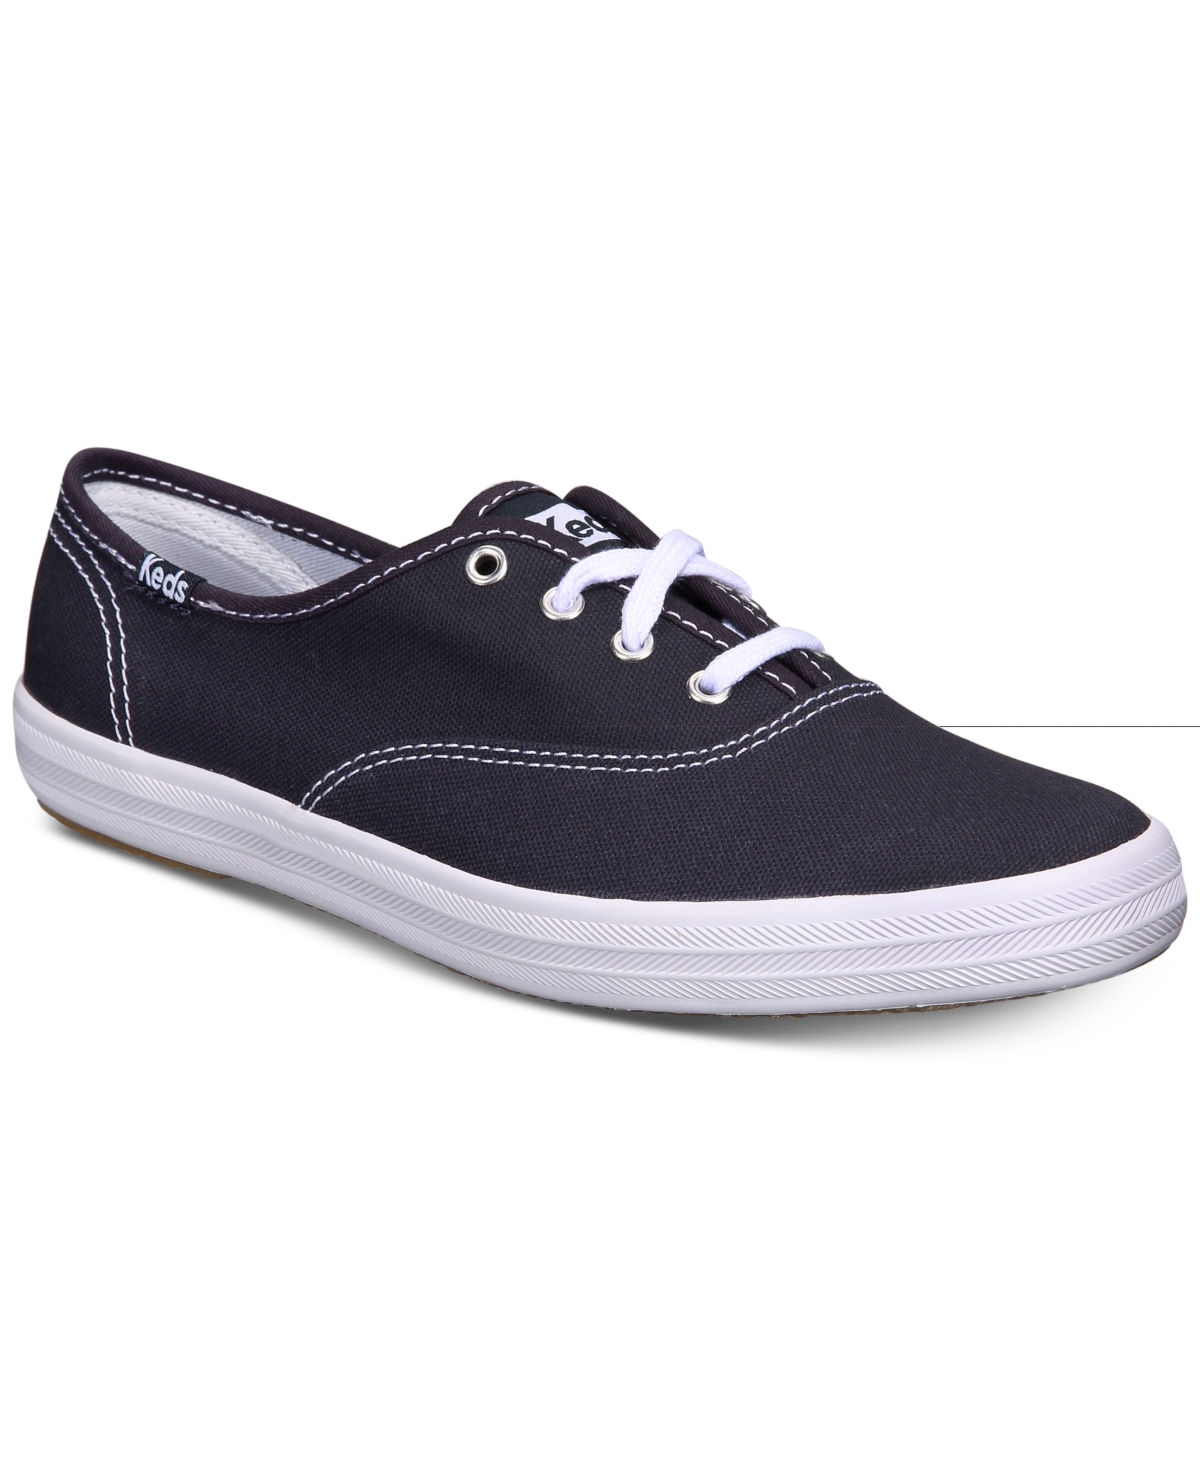 UPC 044209486227 product image for Keds Women's Champion Ortholite Lace-Up Oxford Fashion Sneakers | upcitemdb.com